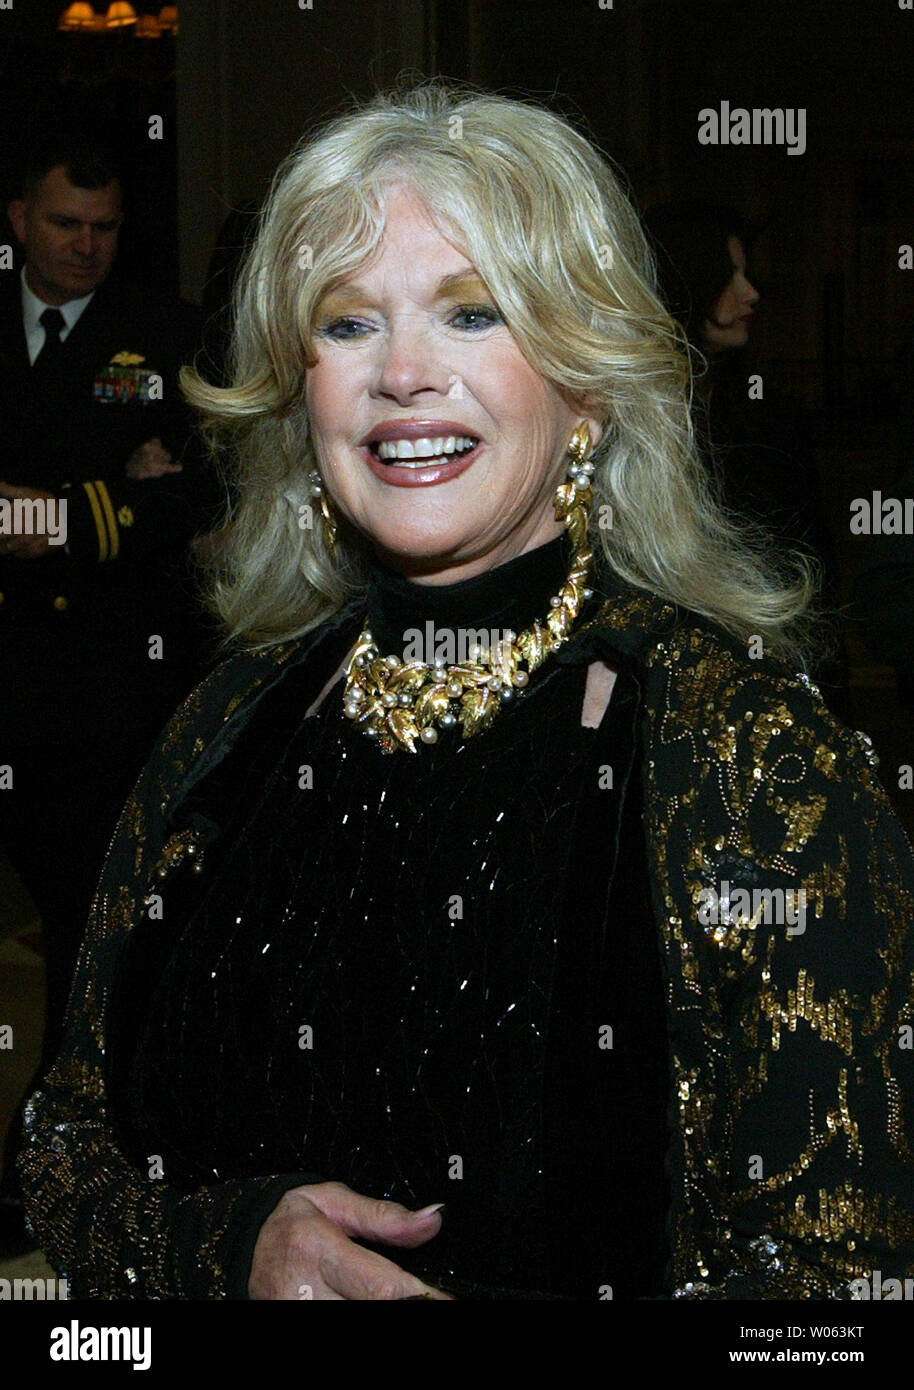 Actress Connie Stevens arrives at the Chase Park Plaza Hotel to accept the 2005 Spirit of Hope Award  from the James S. McDonnell USO during the Salute to Heroes dinner in St. Louis on November 3, 3005. Stevens, who toured with entertainer Bob Hope on his USO tours around the world, is committed to helping those in the armed service and has also received 'The Decoration for Distinguished Civilian Service,' the highest honor that can bestowed on a civilian. (UPI Photo/Bill Greenblatt) Stock Photo